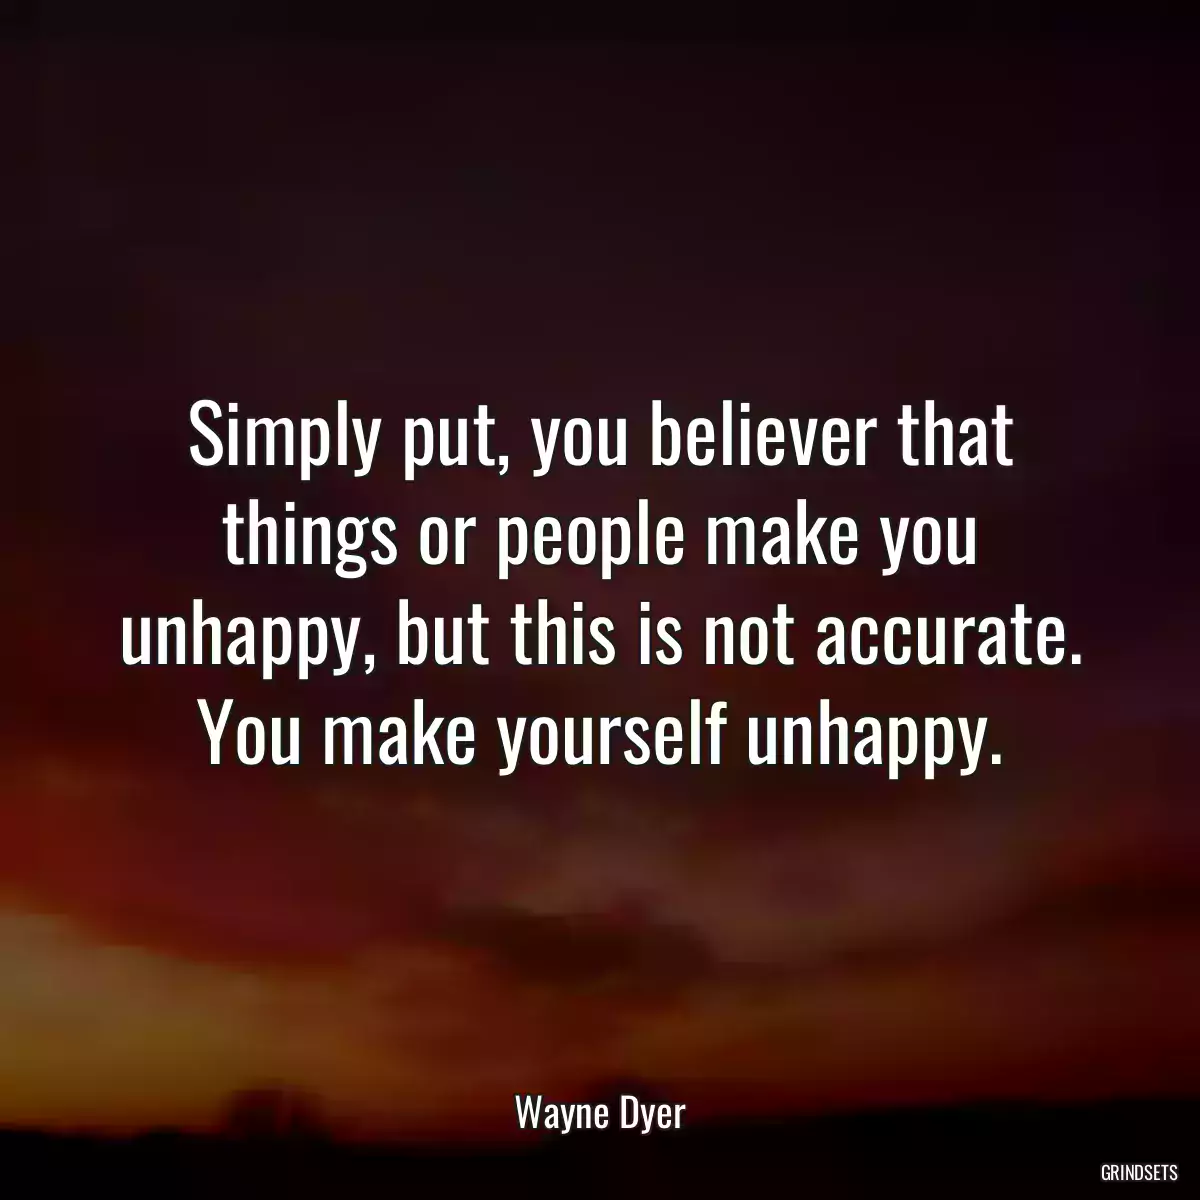 Simply put, you believer that things or people make you unhappy, but this is not accurate. You make yourself unhappy.